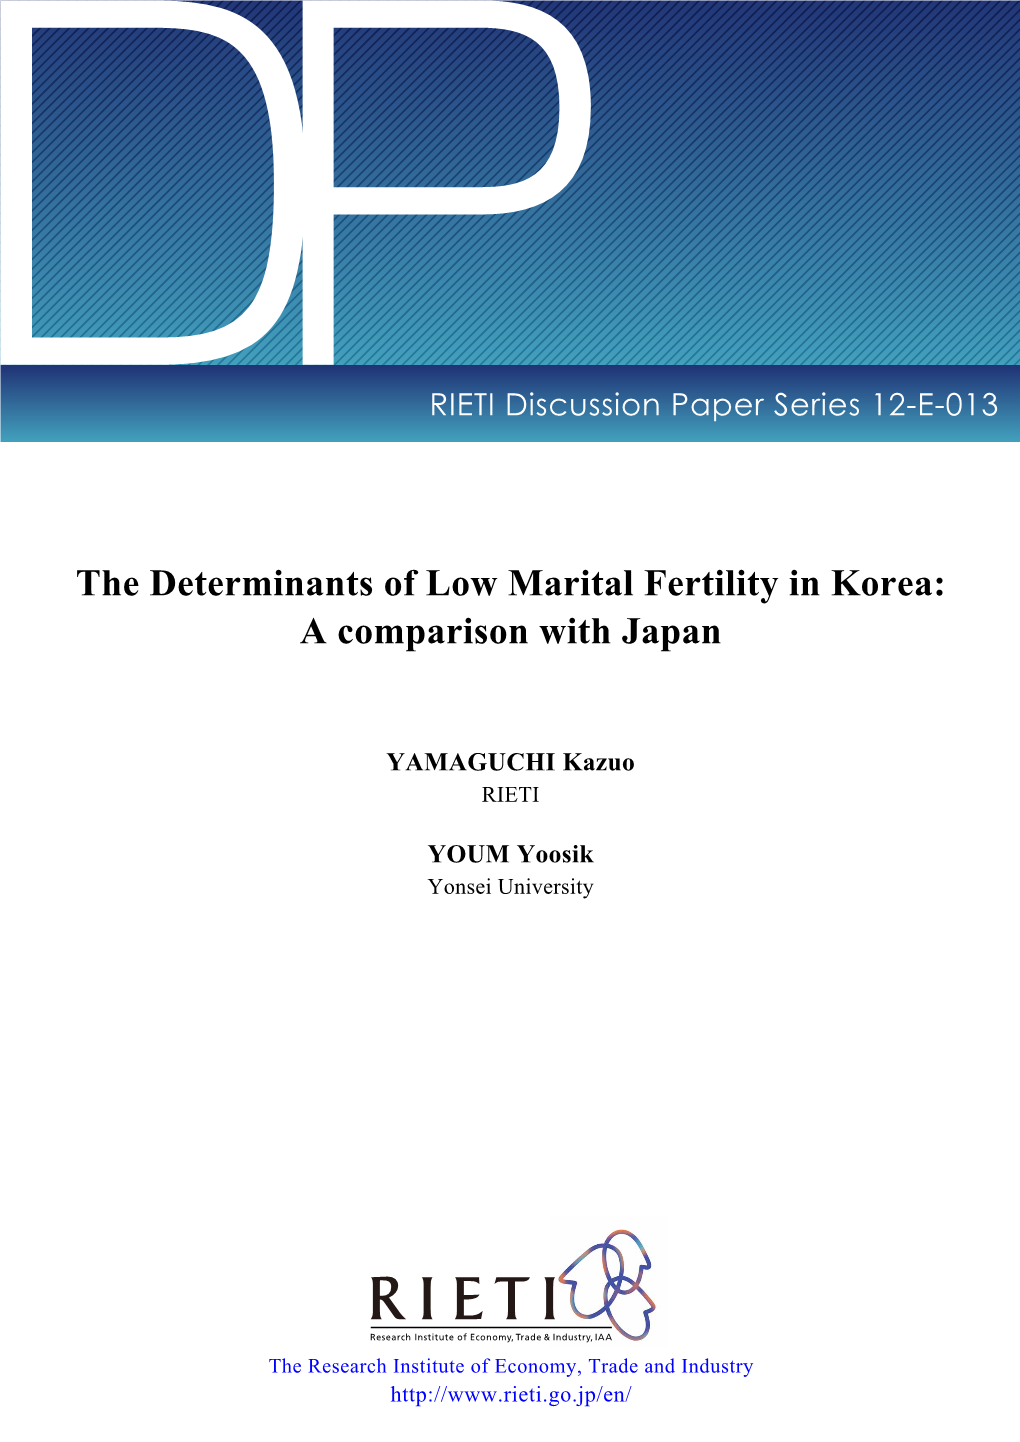 The Determinants of Low Marital Fertility in Korea: a Comparison with Japan